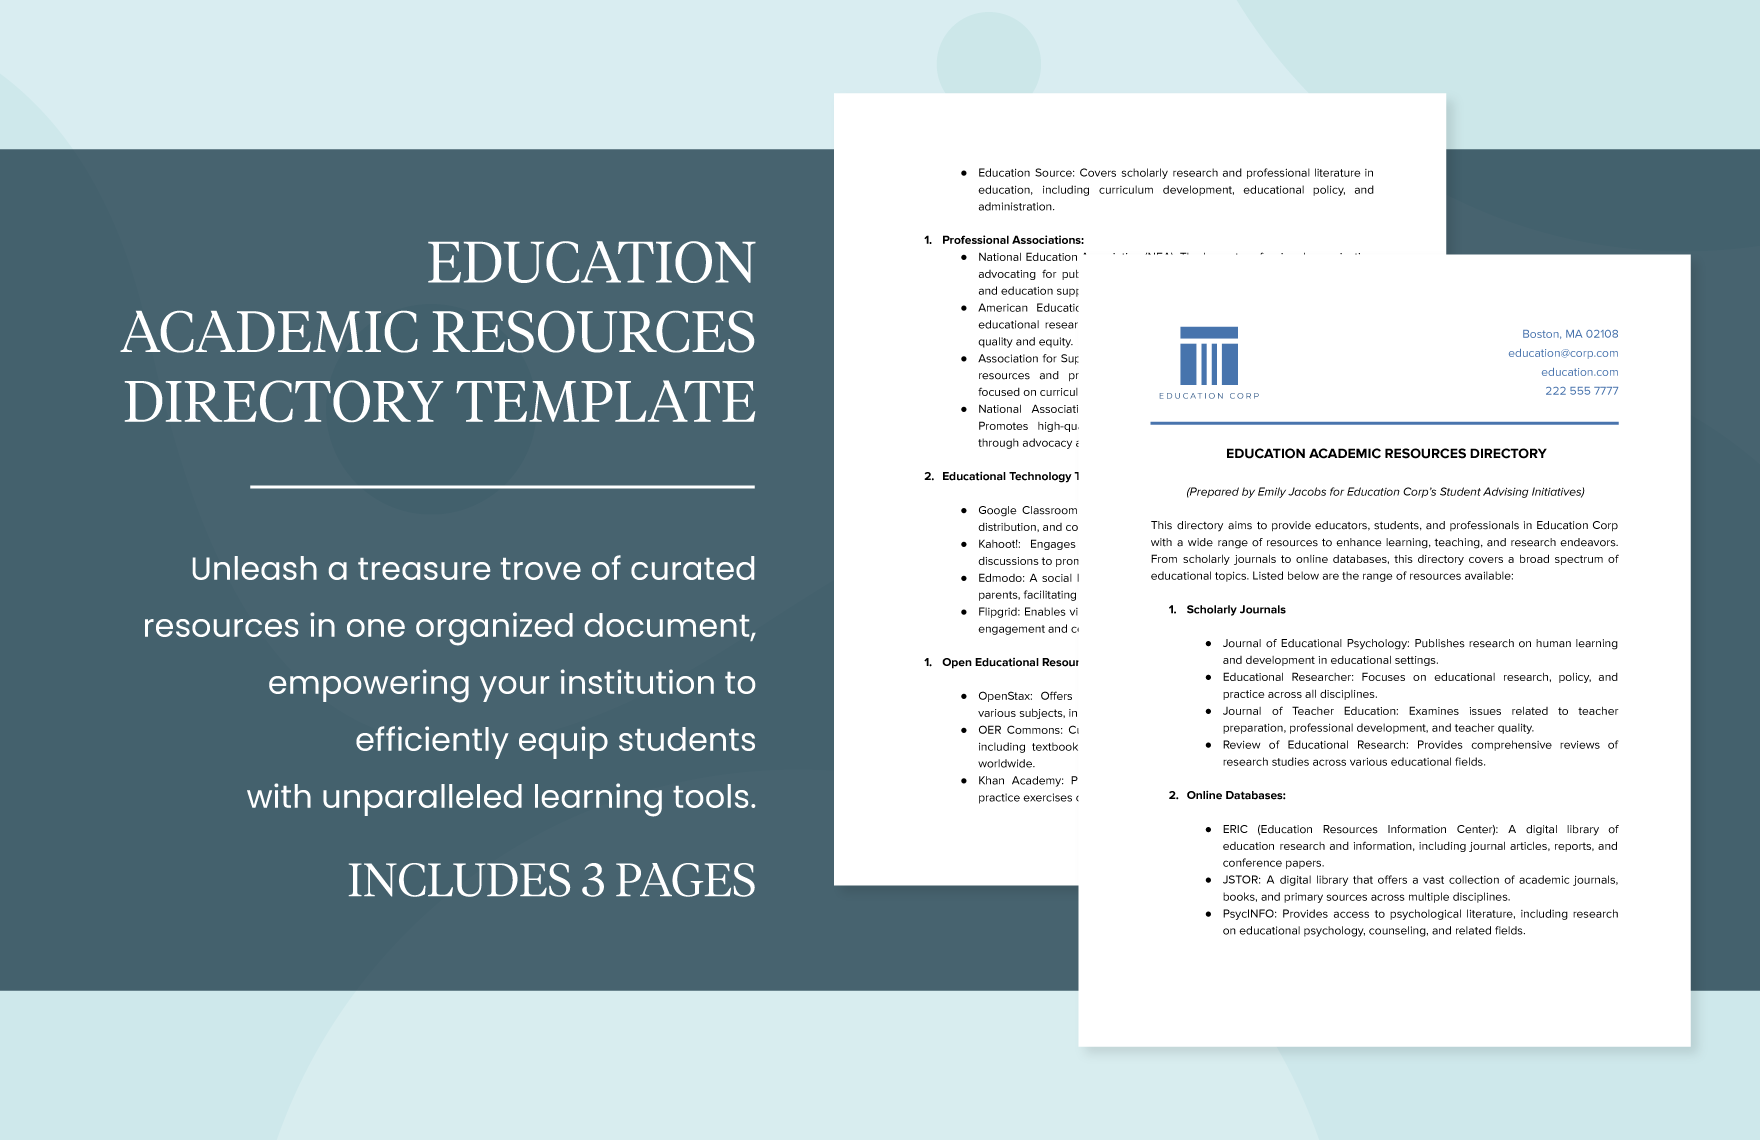 Education Academic Resources Directory Template